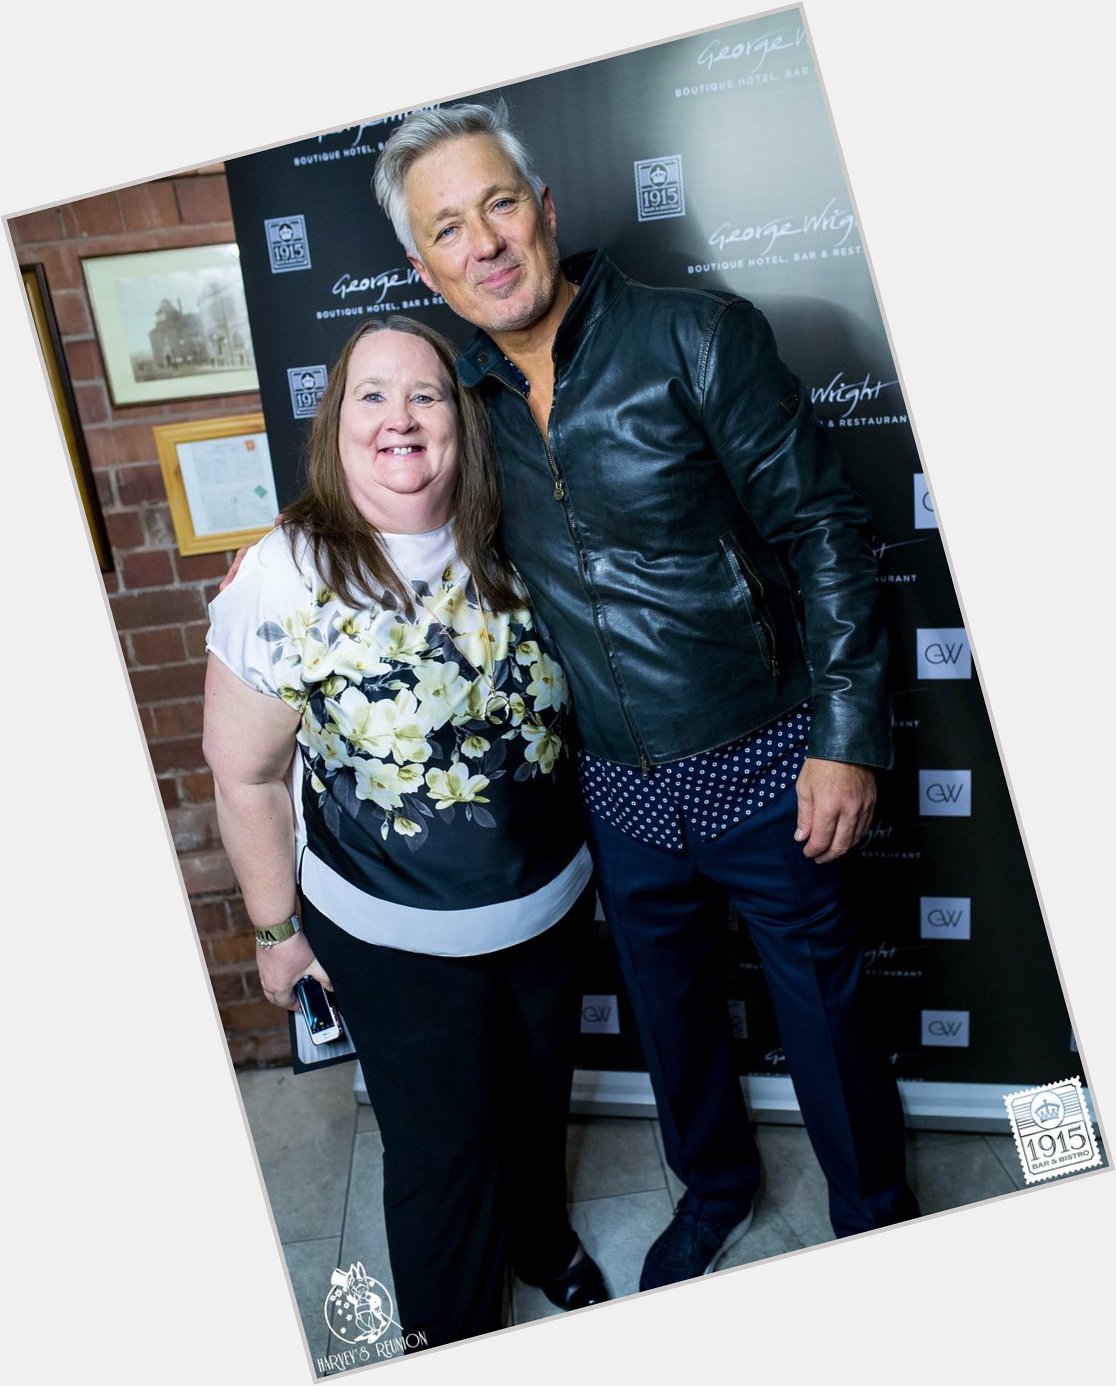 I want to wish the real Martin Kemp a very Happy Birthday today, hope you have a great day! 